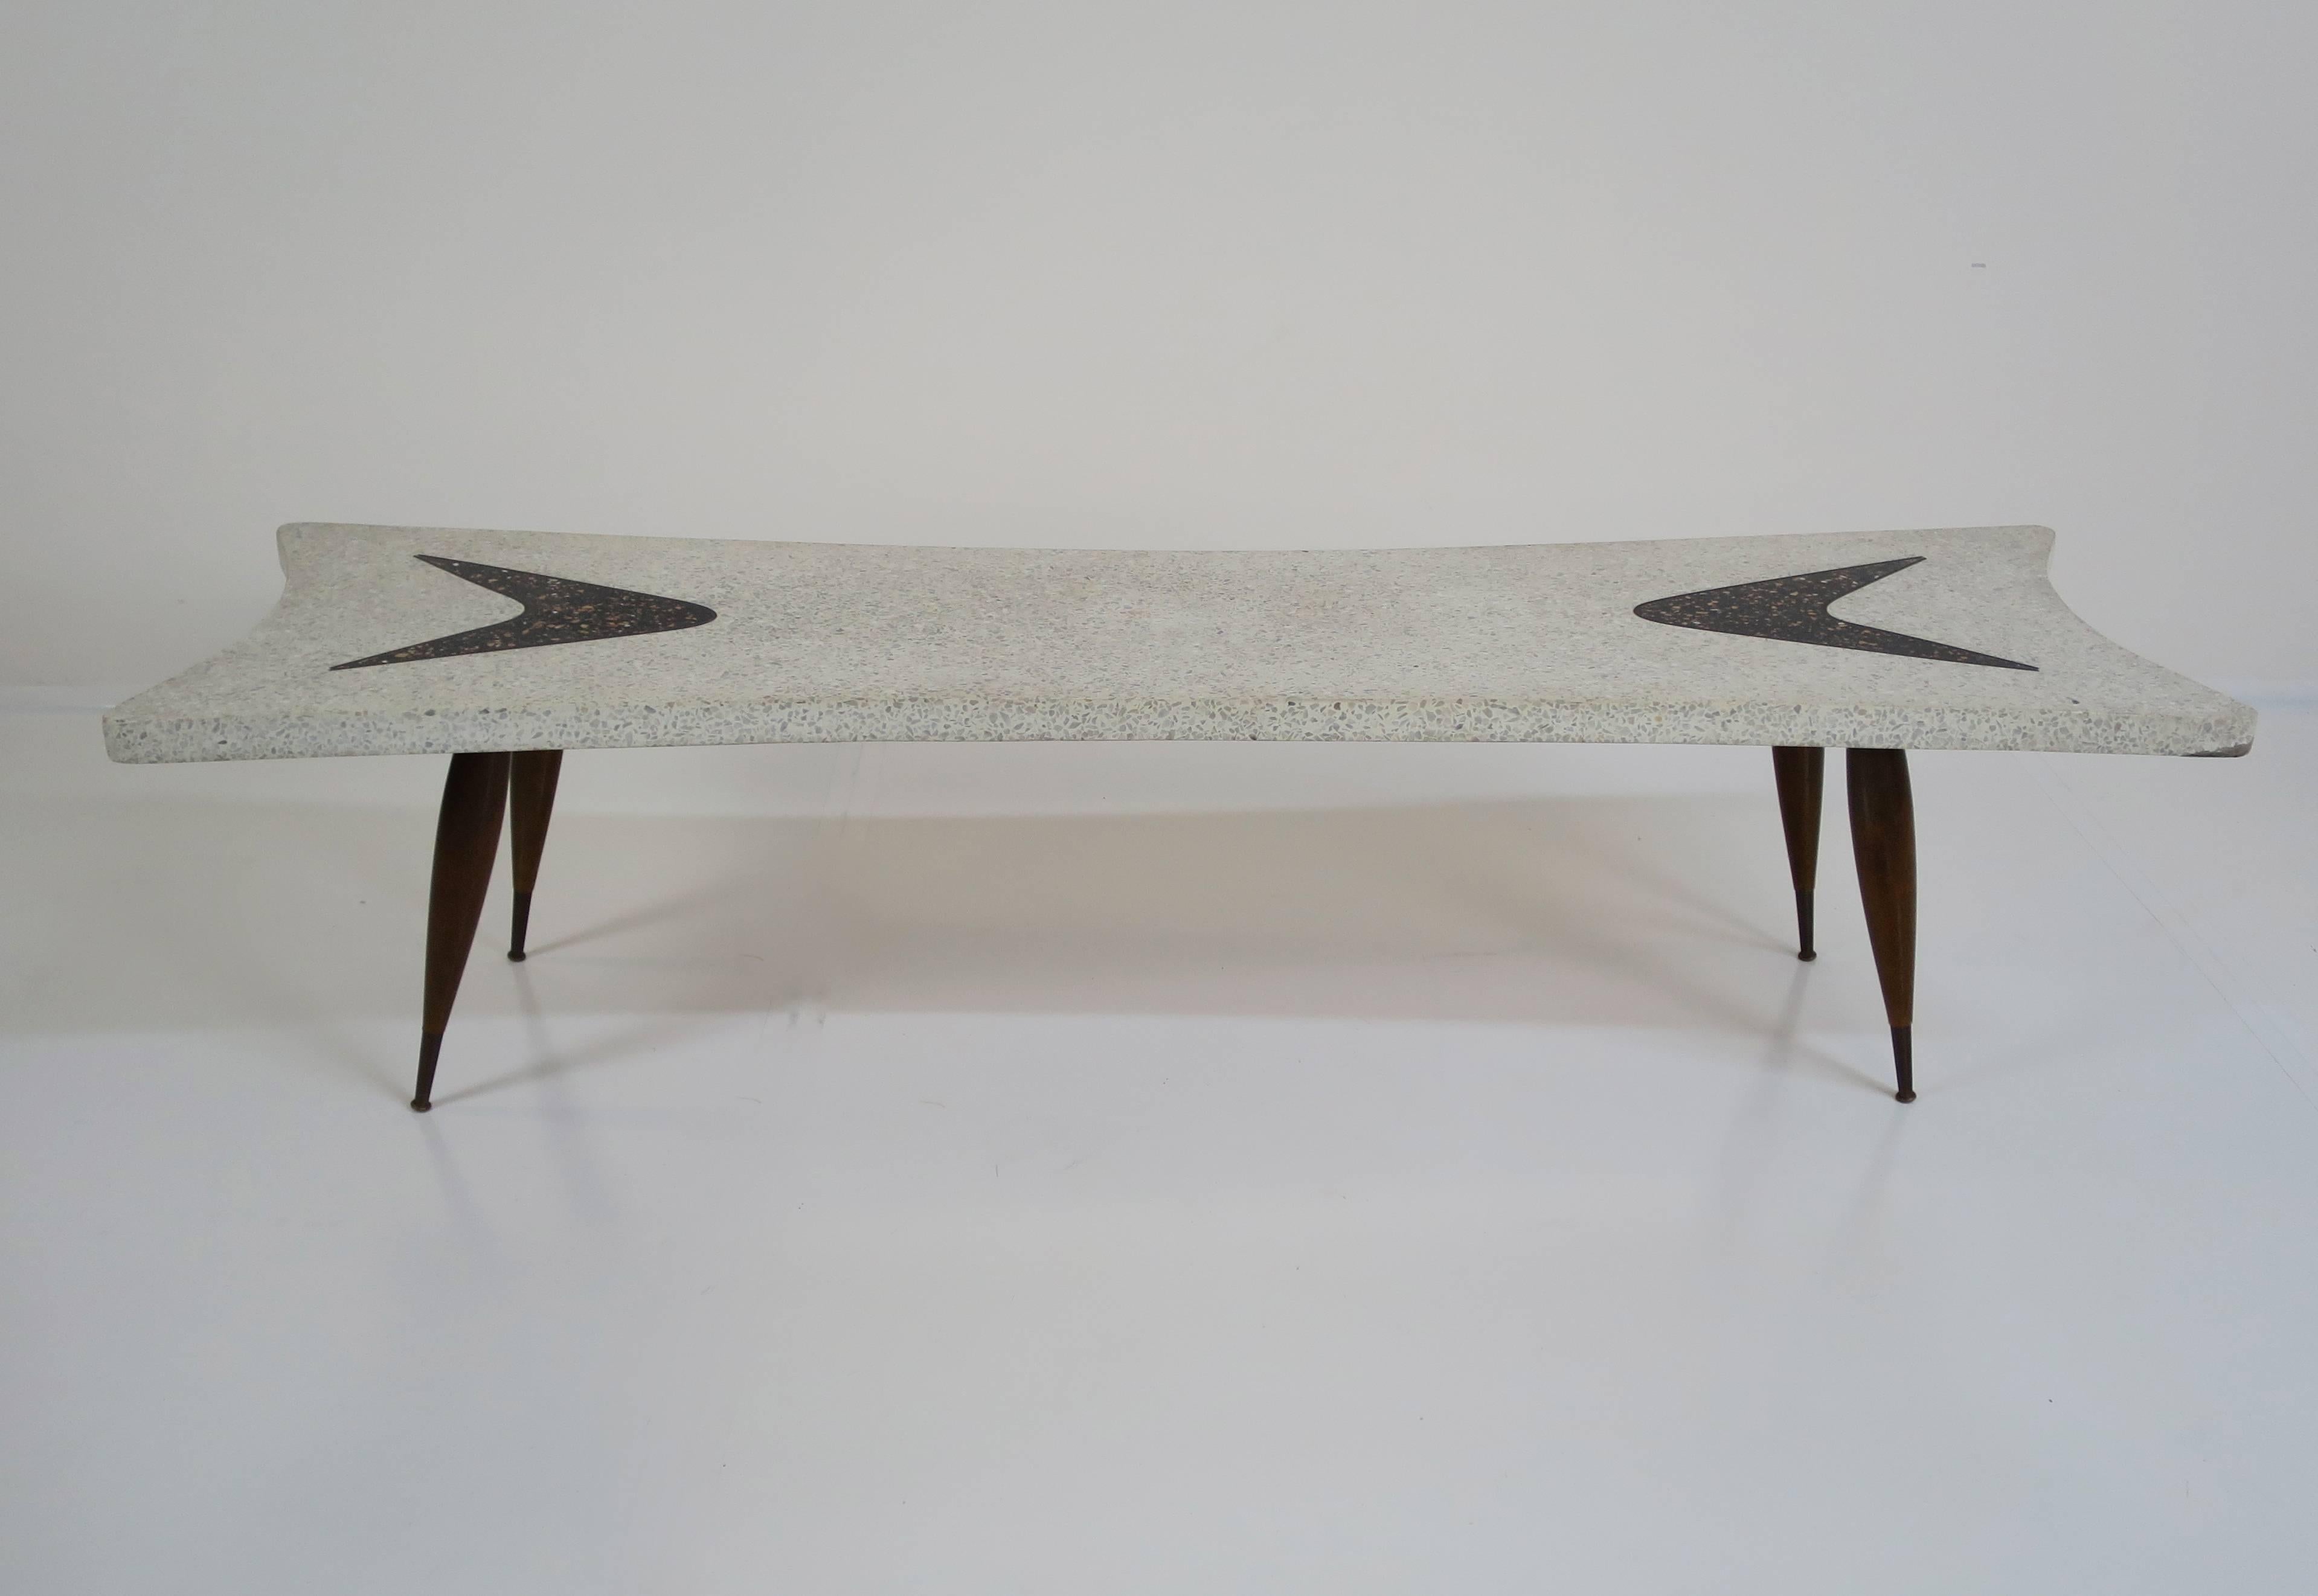 1950s Italian terrazzo coffee or cocktail table. Terrazzo top with tapered wood legs and solid brass sabots. Brass sabots display original patina but can be polished at no charge if you wish.